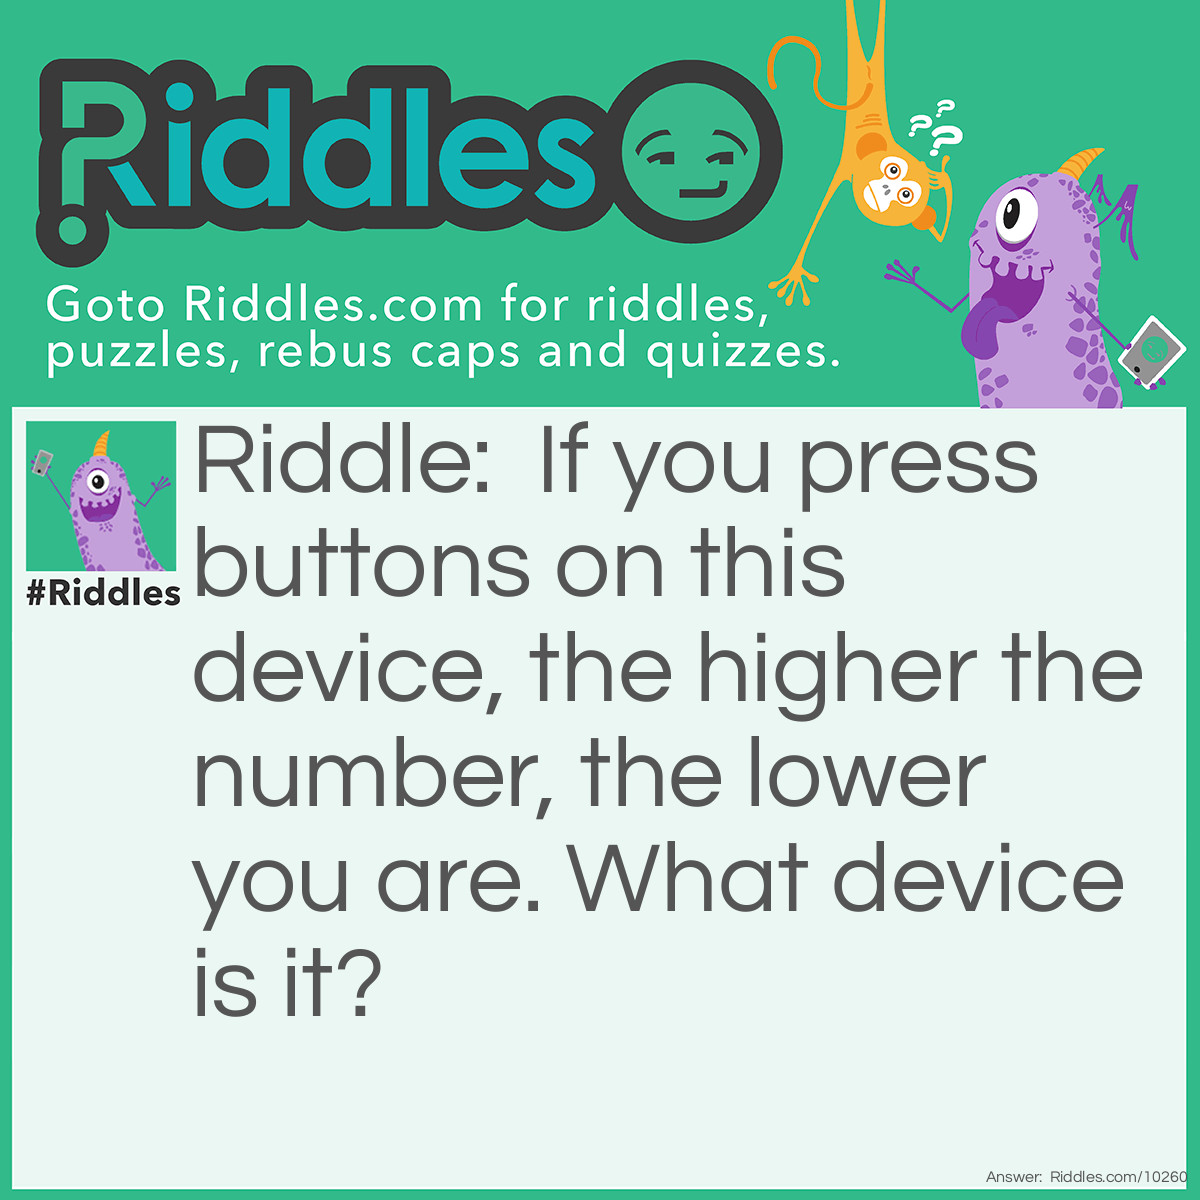 Riddle: If you press buttons on this device, the higher the number, the lower you are. What device is it? Answer: A microwave.